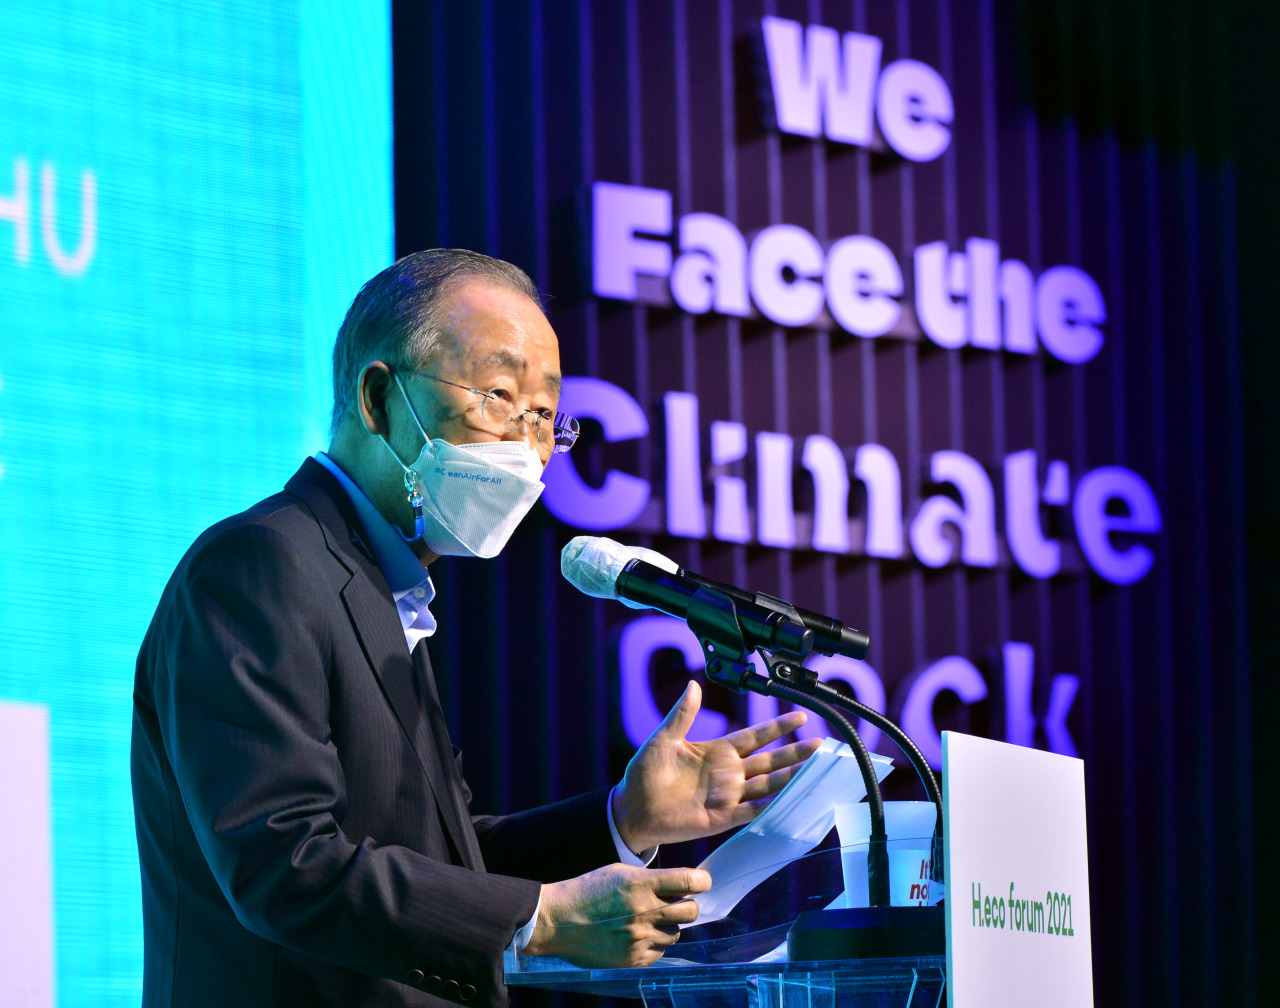 Ban Ki-moon, former UN secretary-general and president and chair of the Global Green Growth Institute, stresses the need for unified efforts at governmental, business and individual levels for the 2050 carbon neutrality goal in his keynote speech at H.eco Forum 2021 in Seoul, Thursday. (Park Hyun-koo/The Korea Herald)